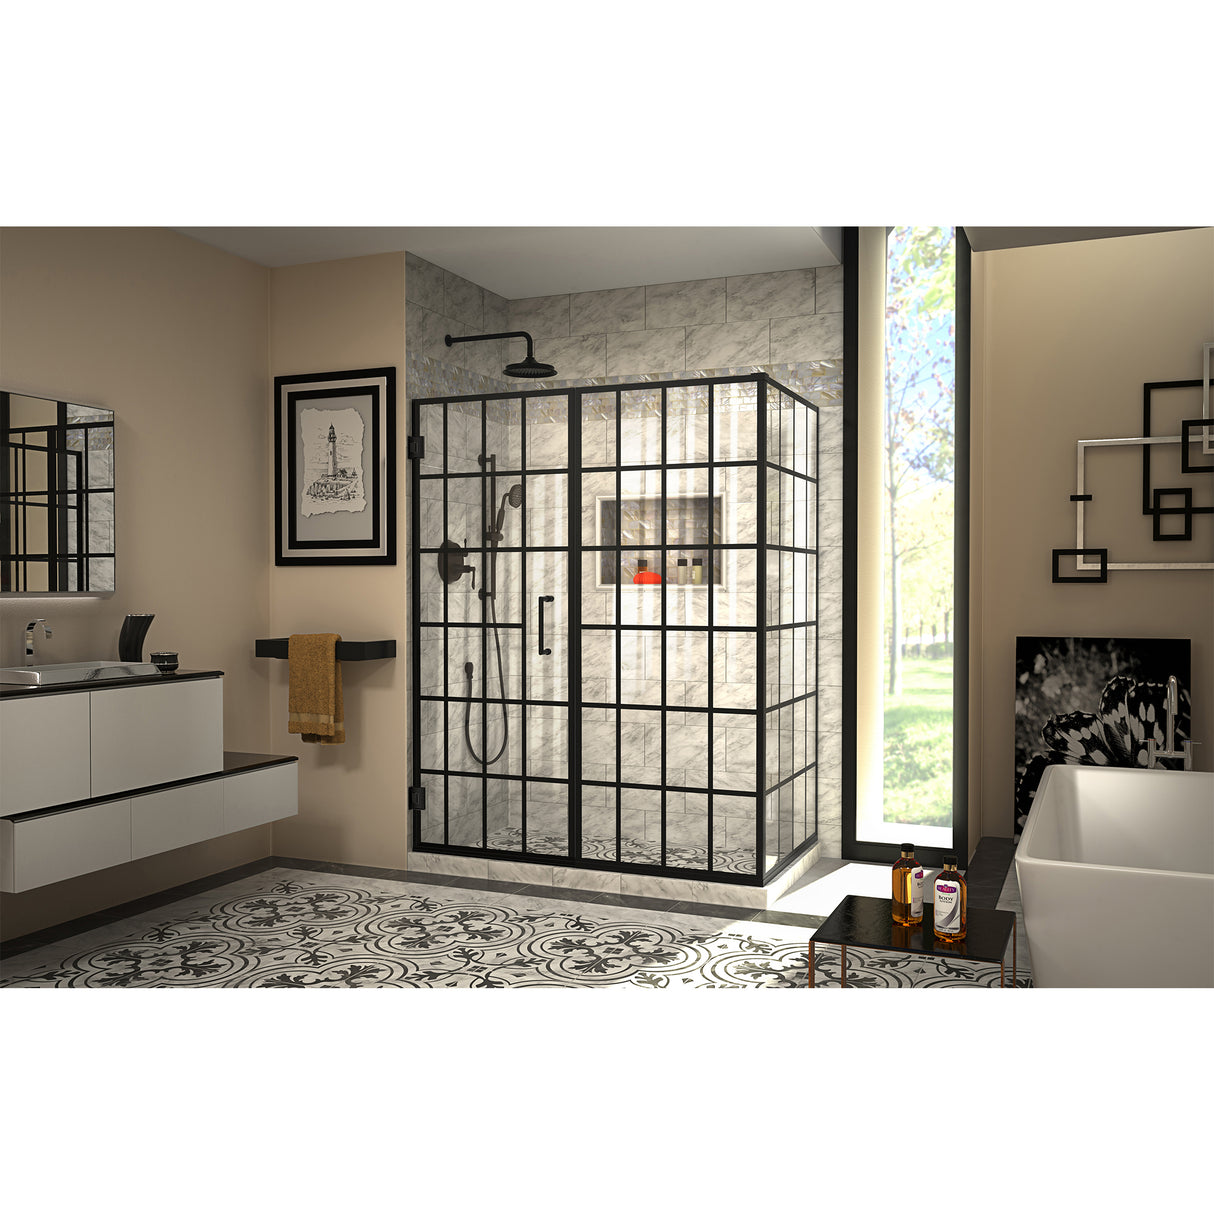 DreamLine Unidoor Toulon 34 in. D x 58 in. W x 72 in. H Frameless Hinged Shower Enclosure in Satin Black